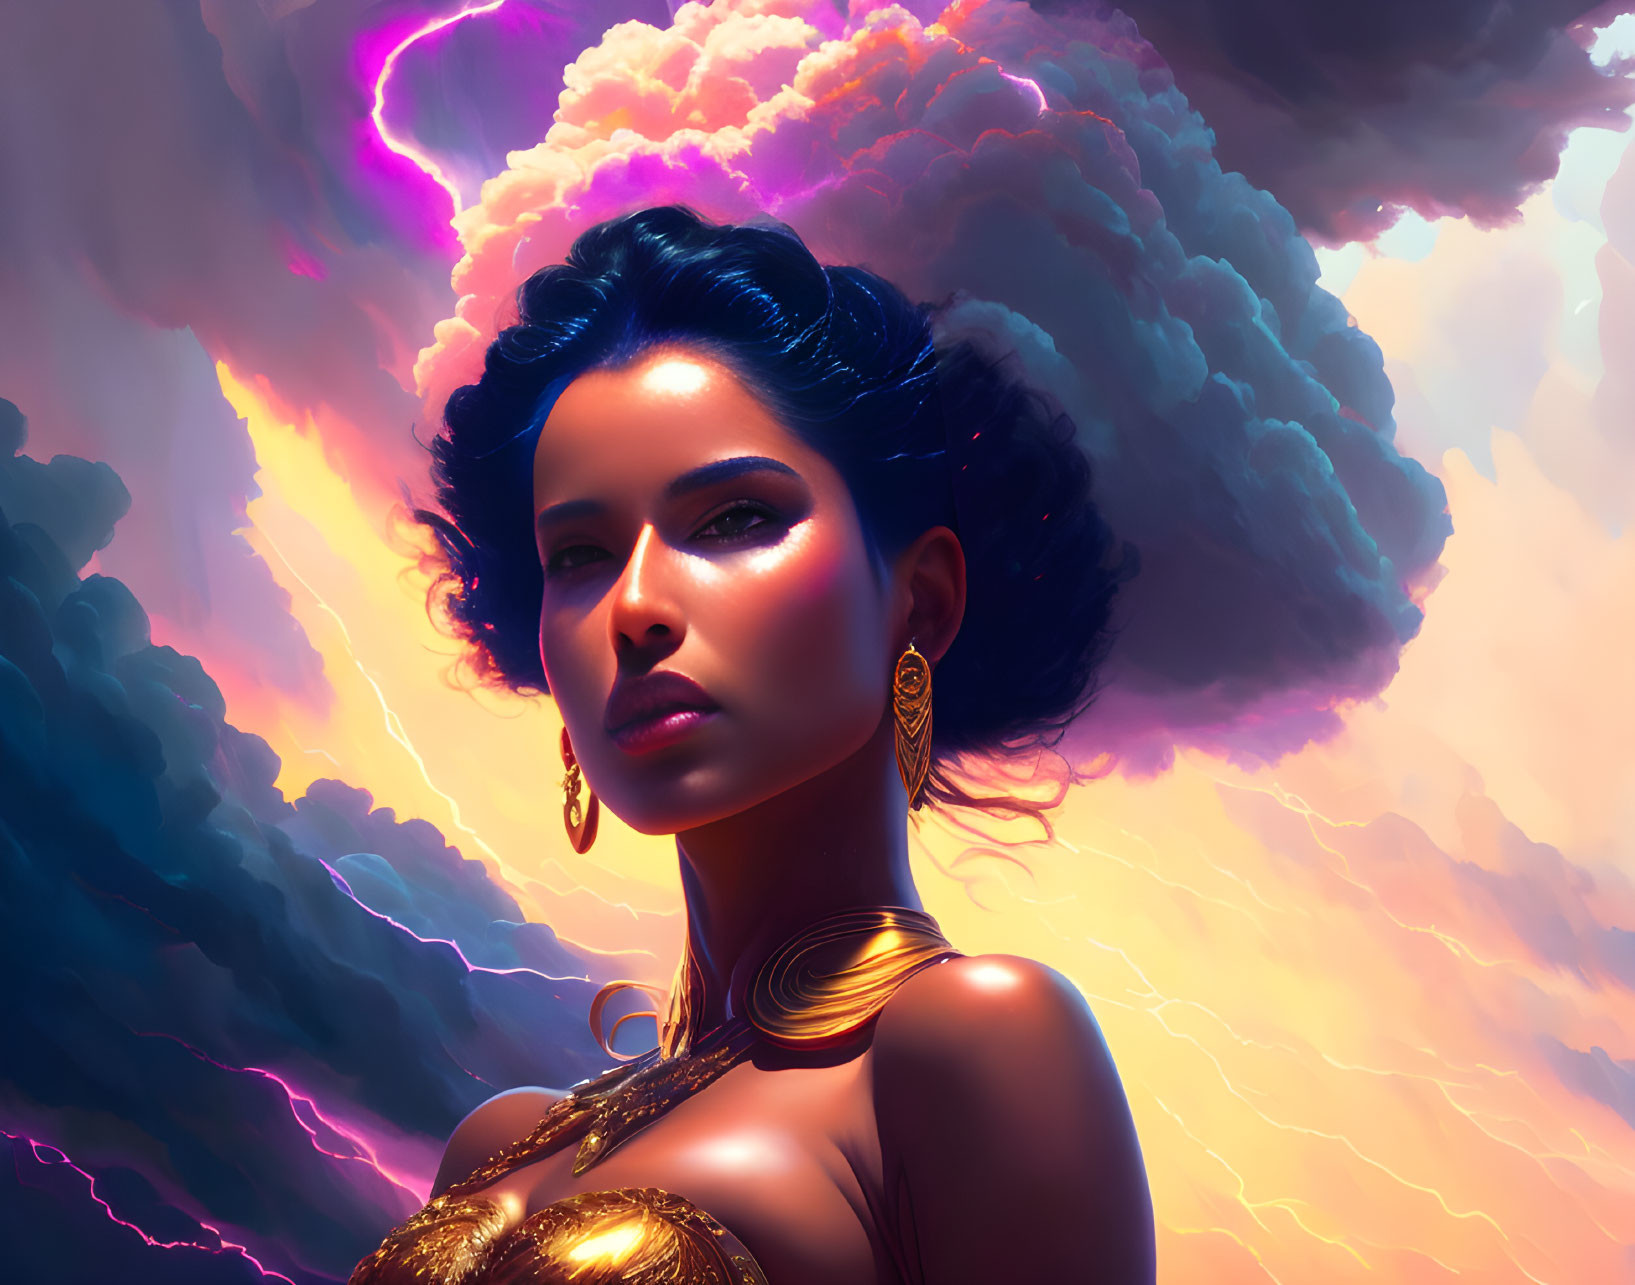 Woman in Golden Attire with Prominent Earrings Against Dramatic Stormy Clouds